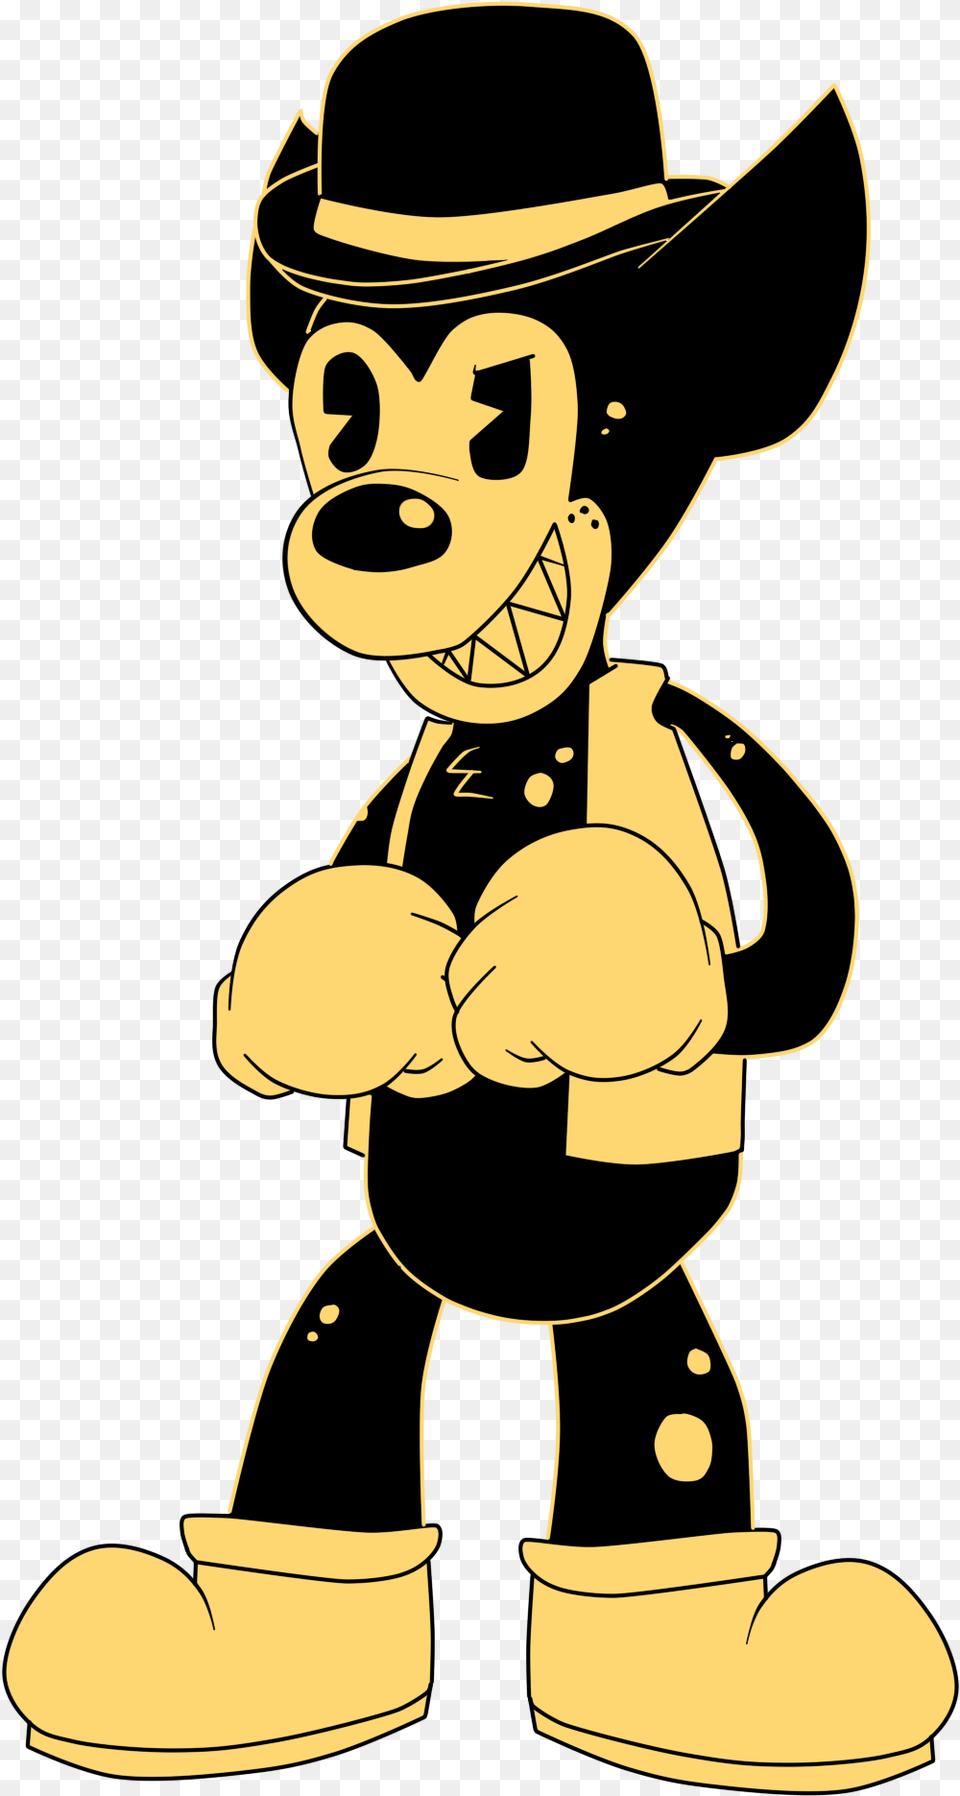 The Rowdy Hyena Bendy And The Ink Machine Cartoon Bendy, Clothing, Hat, Baby, Person Png